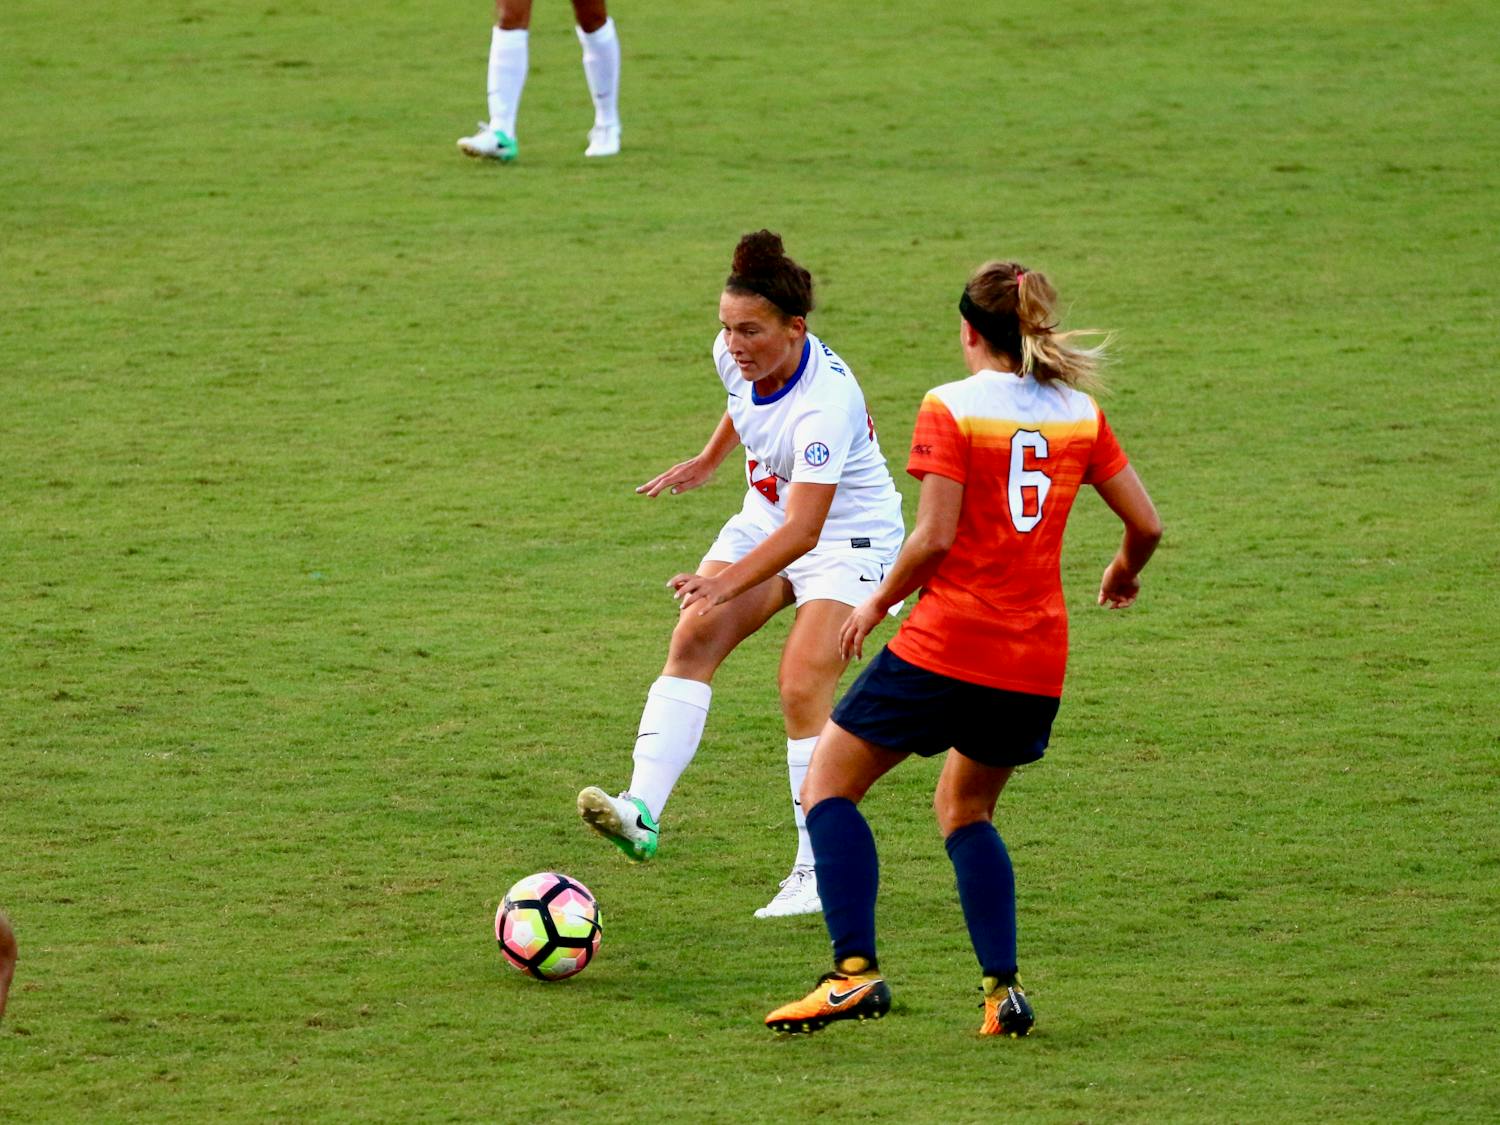 Sophomore forward Madison Alexander gave Florida a 2-0 lead in the 35th minute. It was her second goal in as many games for the Gators this season. 